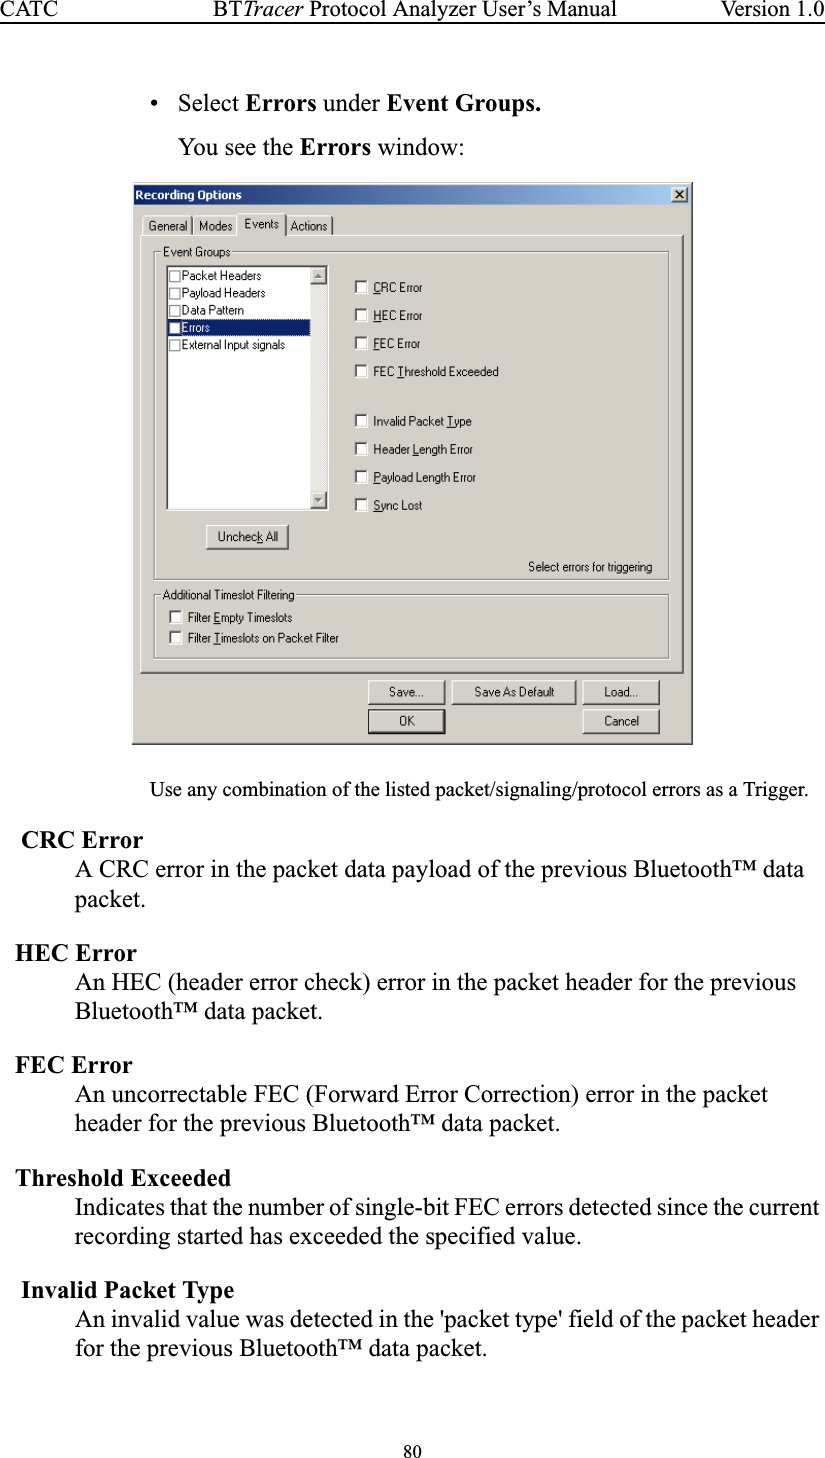 80BTTracer Protocol Analyzer User’s ManualCATC Version 1.0• Select Errors under Event Groups.You see the Errors window:Use any combination of the listed packet/signaling/protocol errors as a Trigger.CRC ErrorA CRC error in the packet data payload of the previous Bluetooth™ datapacket.HEC ErrorAn HEC (header error check) error in the packet header for the previousBluetooth™ data packet.FEC ErrorAn uncorrectable FEC (Forward Error Correction) error in the packetheader for the previous Bluetooth™ data packet.Threshold ExceededIndicates that the number of single-bit FEC errors detected since the currentrecording started has exceeded the specified value.Invalid Packet TypeAn invalid value was detected in the &apos;packet type&apos; field of the packet headerfor the previous Bluetooth™ data packet.